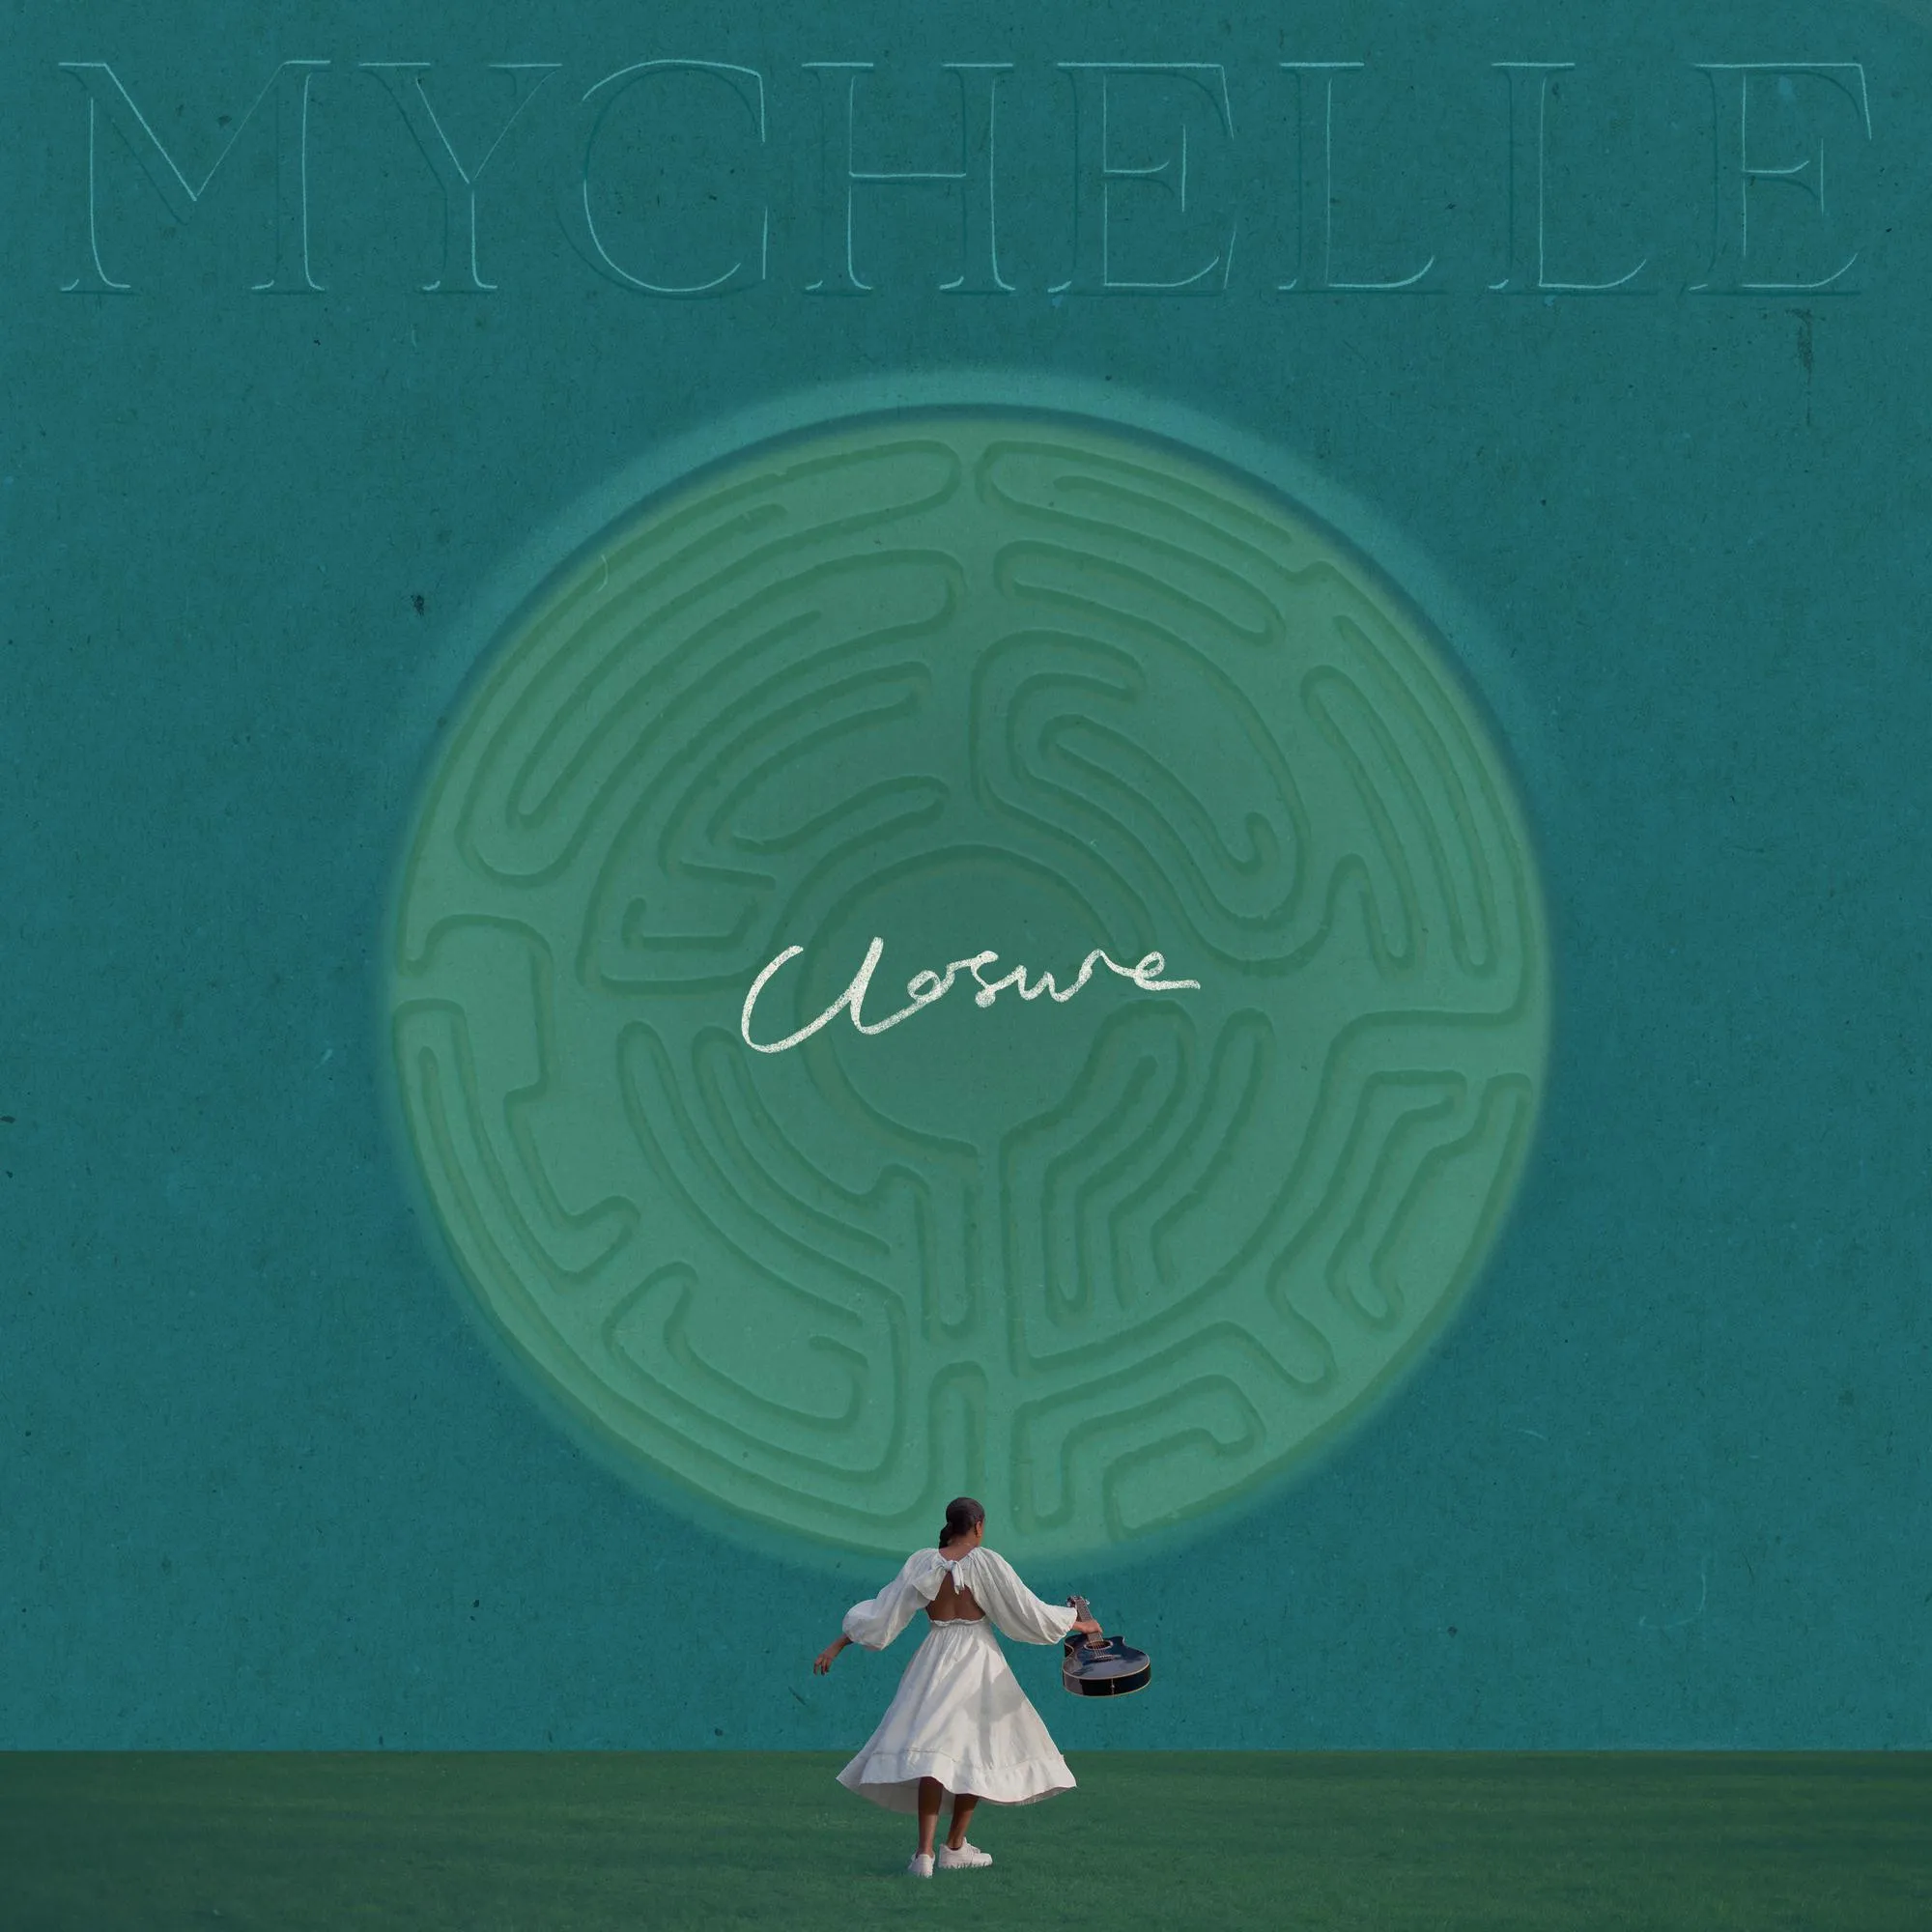 <strong>Mychelle - Closure / Someone Who Knows</strong> (Vinyl LP - black)